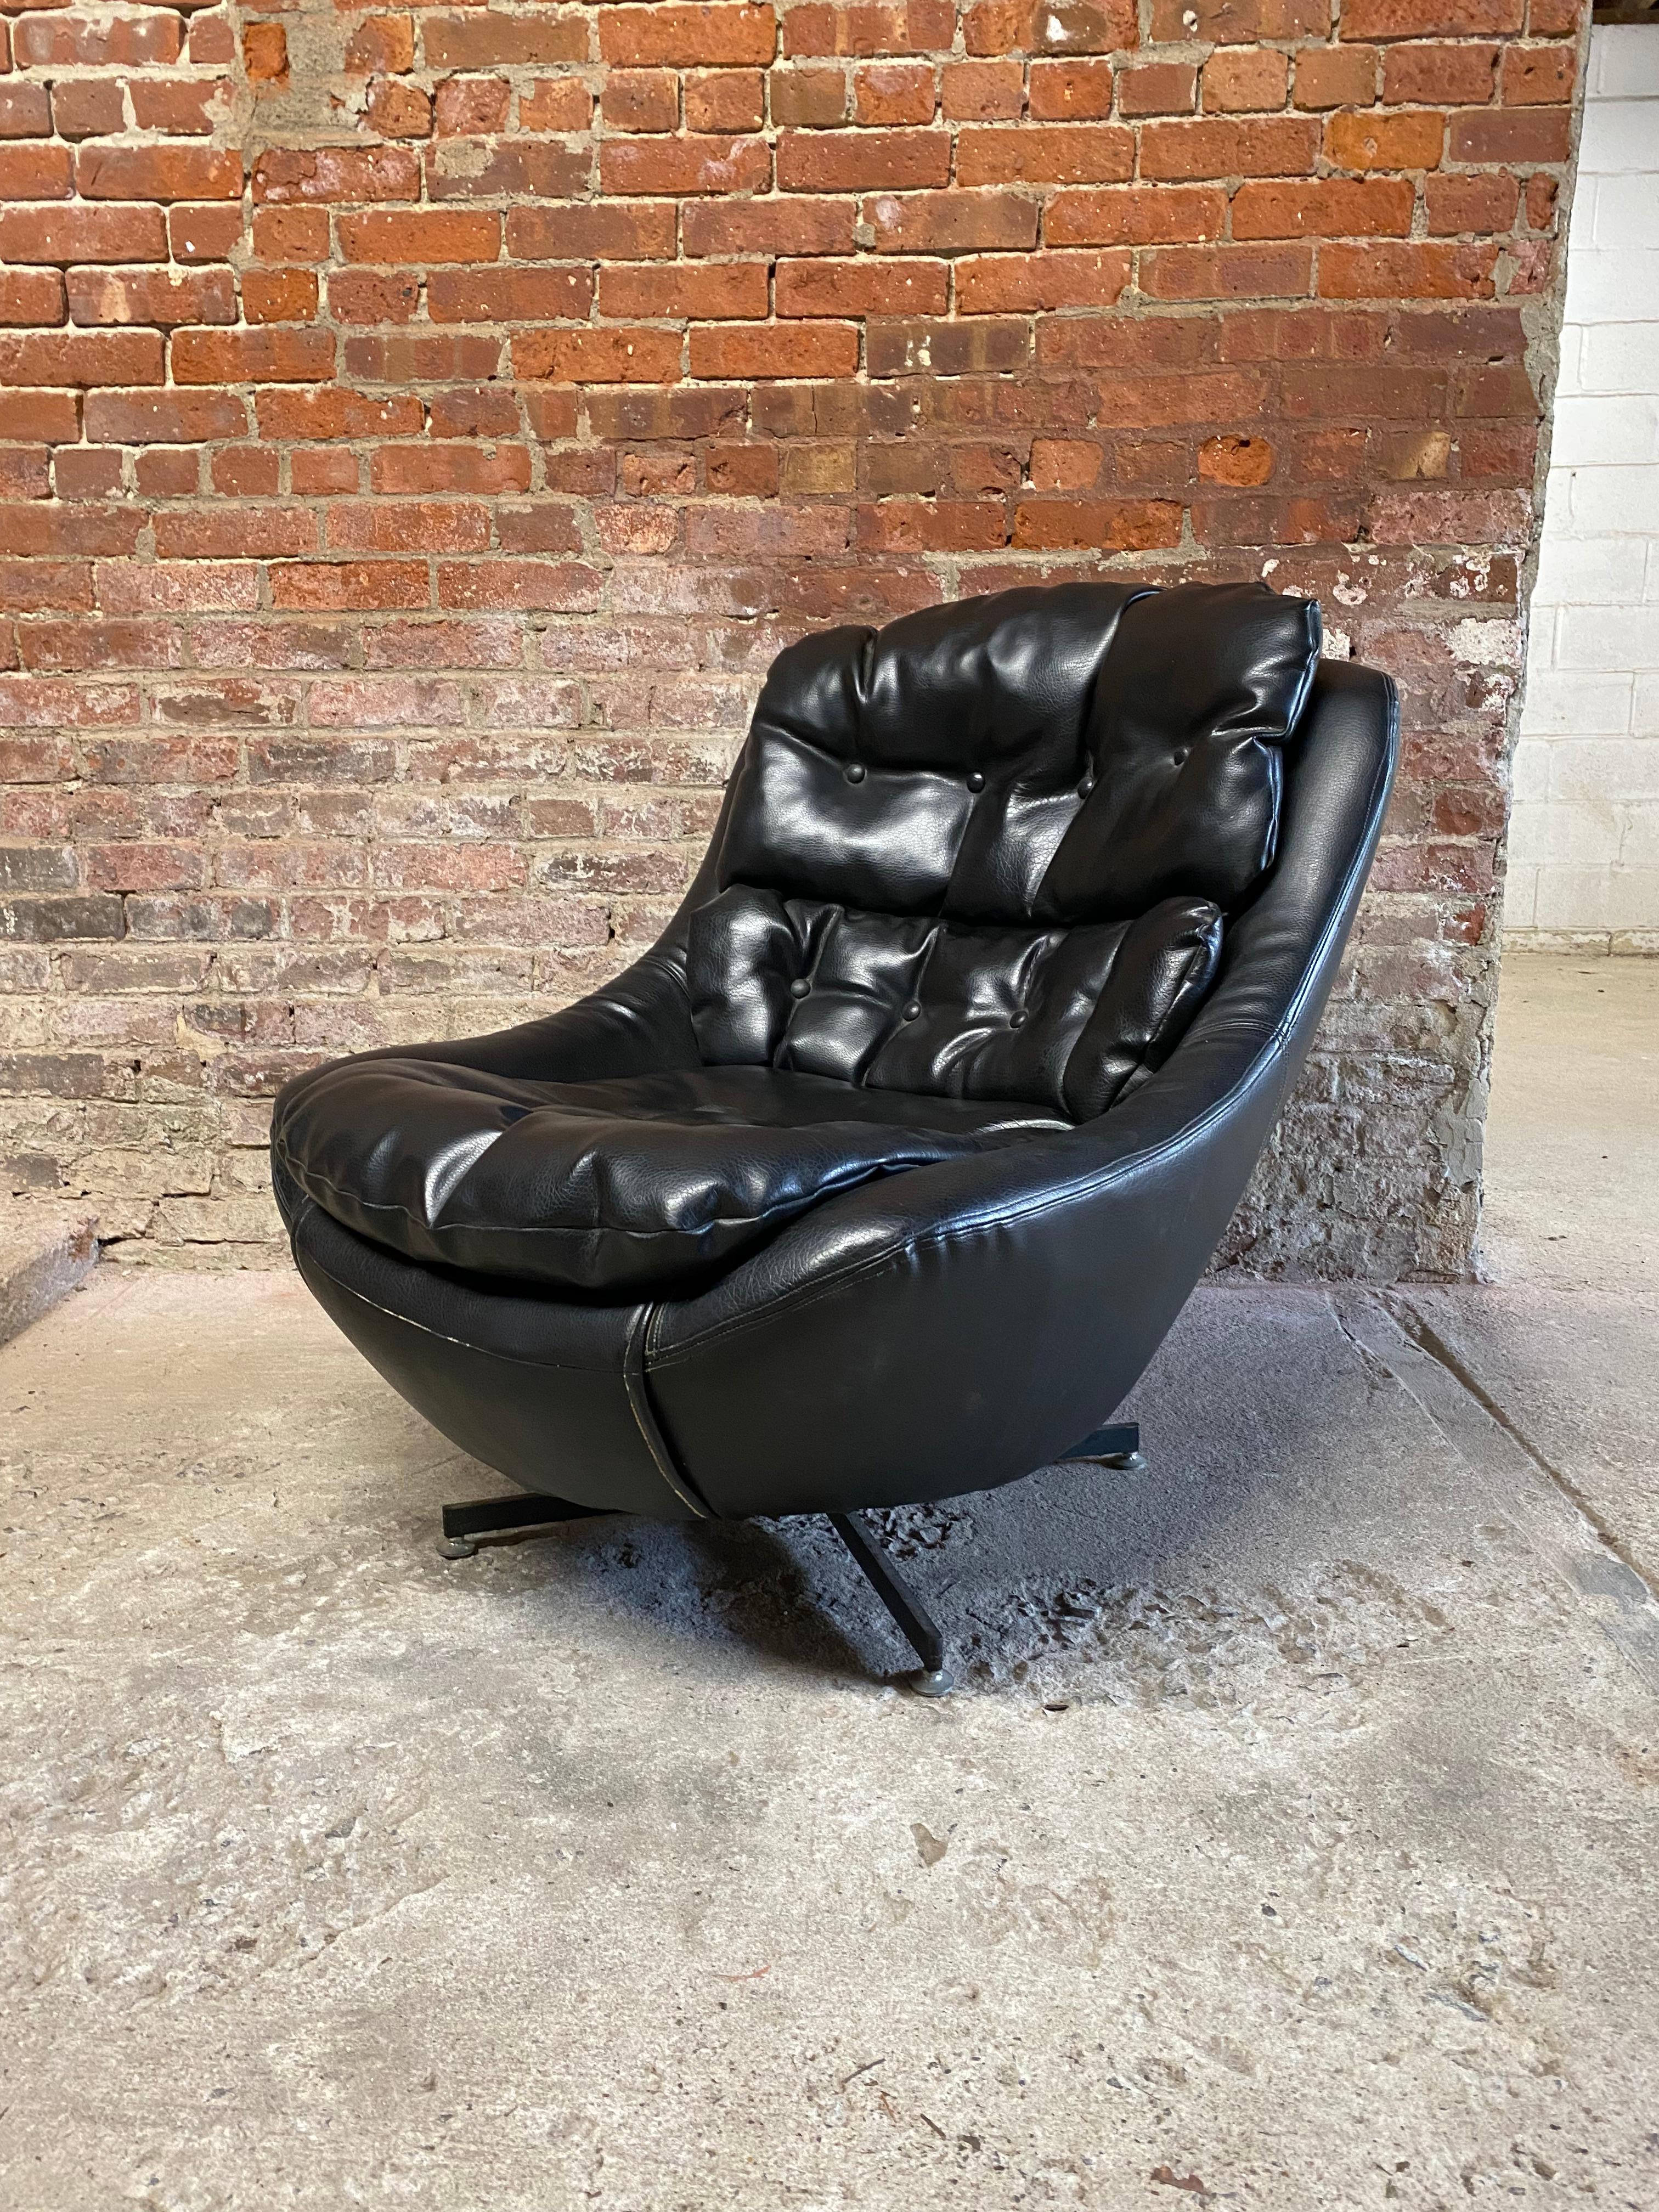 Koehler Signature Design black swivel bucket chair. Original black vinyl/naugahyde upholstery. Removable three part seat and back cushion. There is an extra cushion included upon purchase. Black steel base. Circa 1960-70. Extremely comfortable and